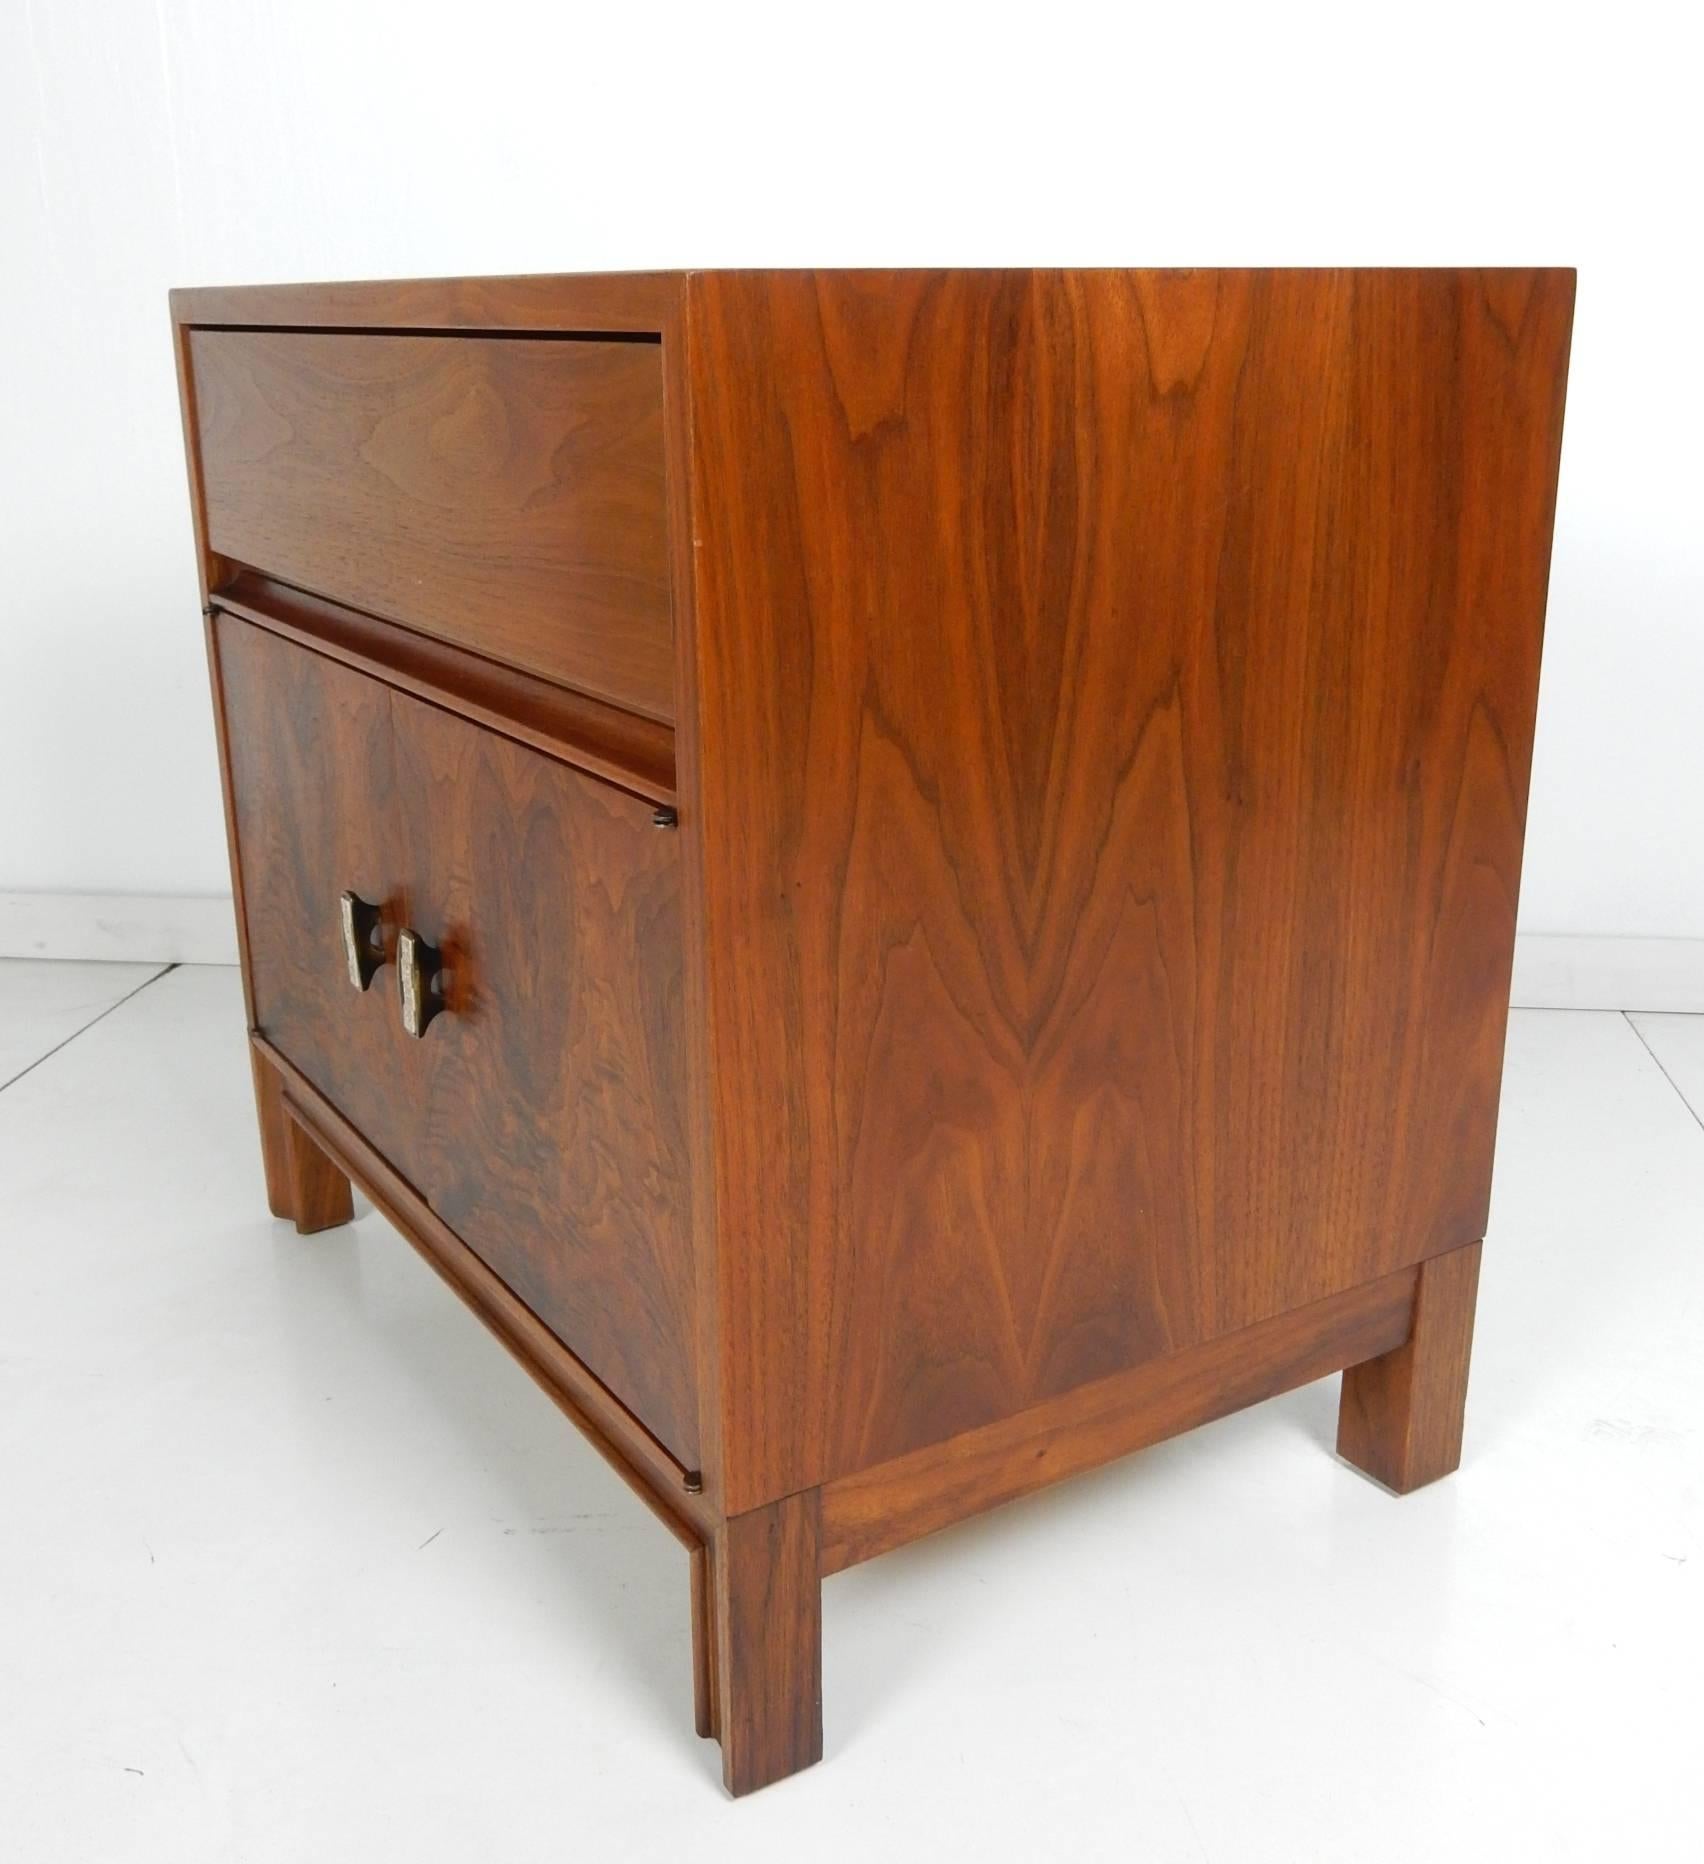 Spectacular pair of side tables designed by John Keal for Brown-Saltman of California,
circa 1950s. Gorgeous two-tone wood used has an amazing grain pattern on front, top and sides.
Ceramic tile inlaid brass door pulls on each of two cabinet doors.